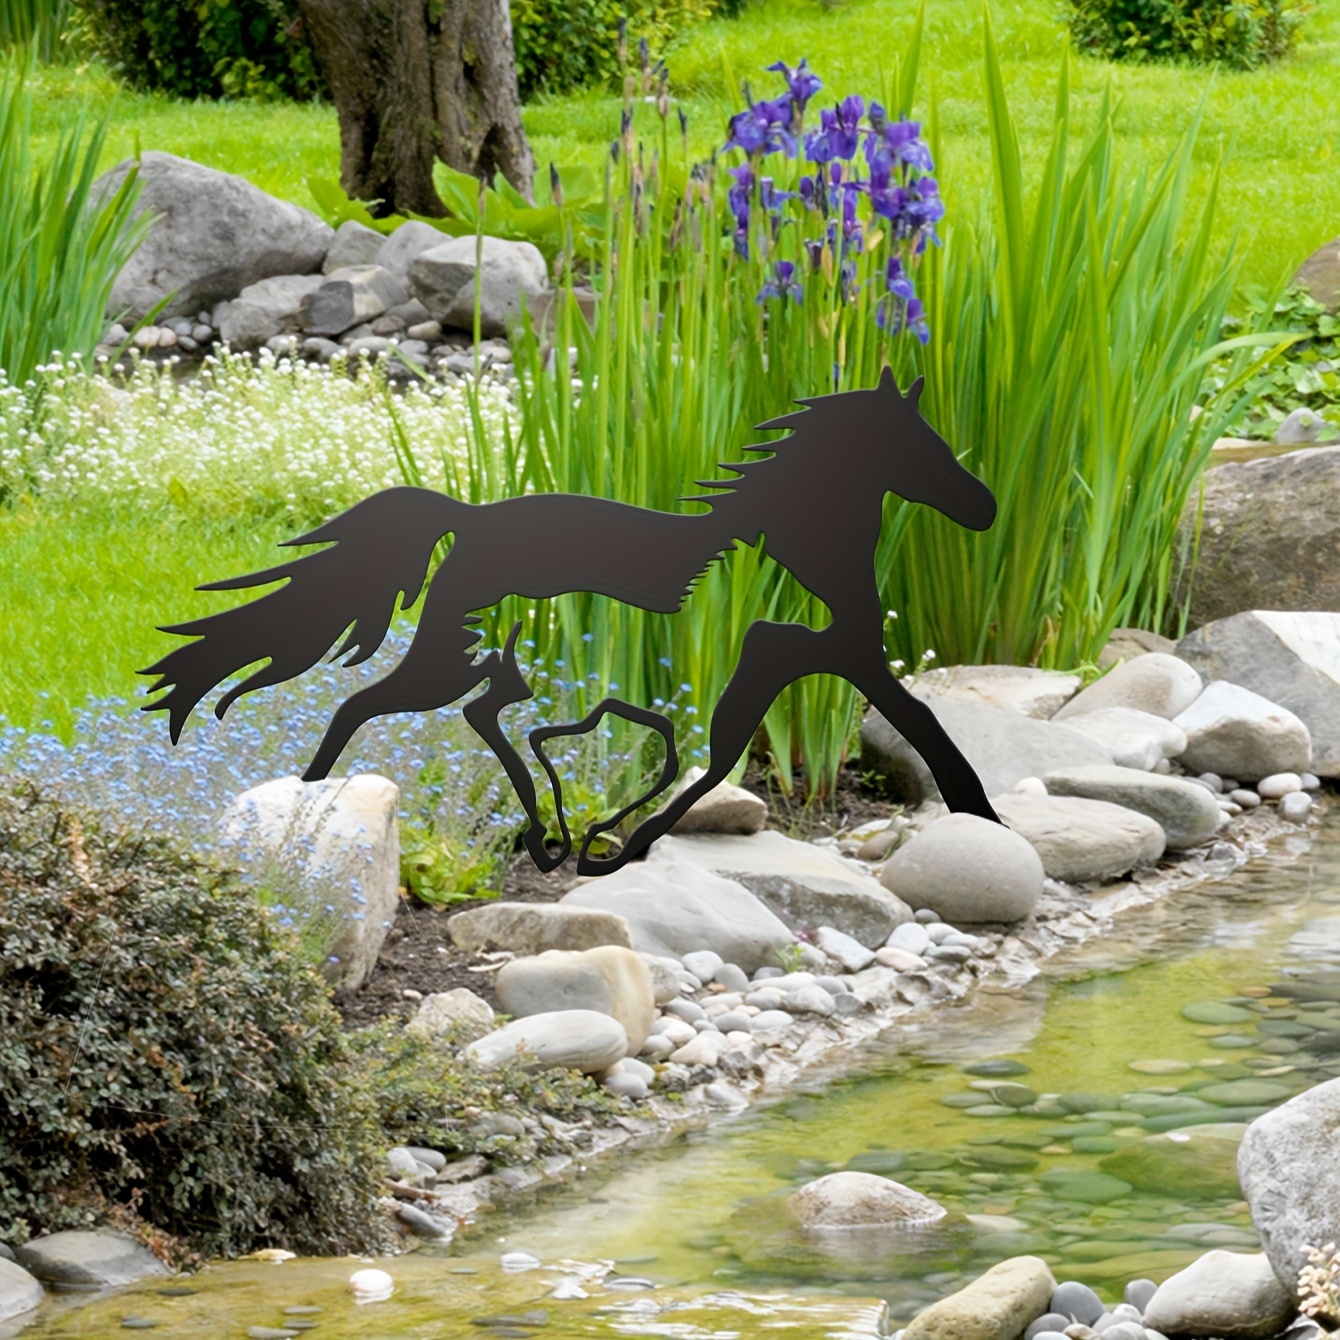 

1pc Rustic Farmhouse Decor, Black Metal Running Horse Silhouette Yard Sign With Removable Stakes, Outdoor Lawn & Garden Decor, Fence Ornament